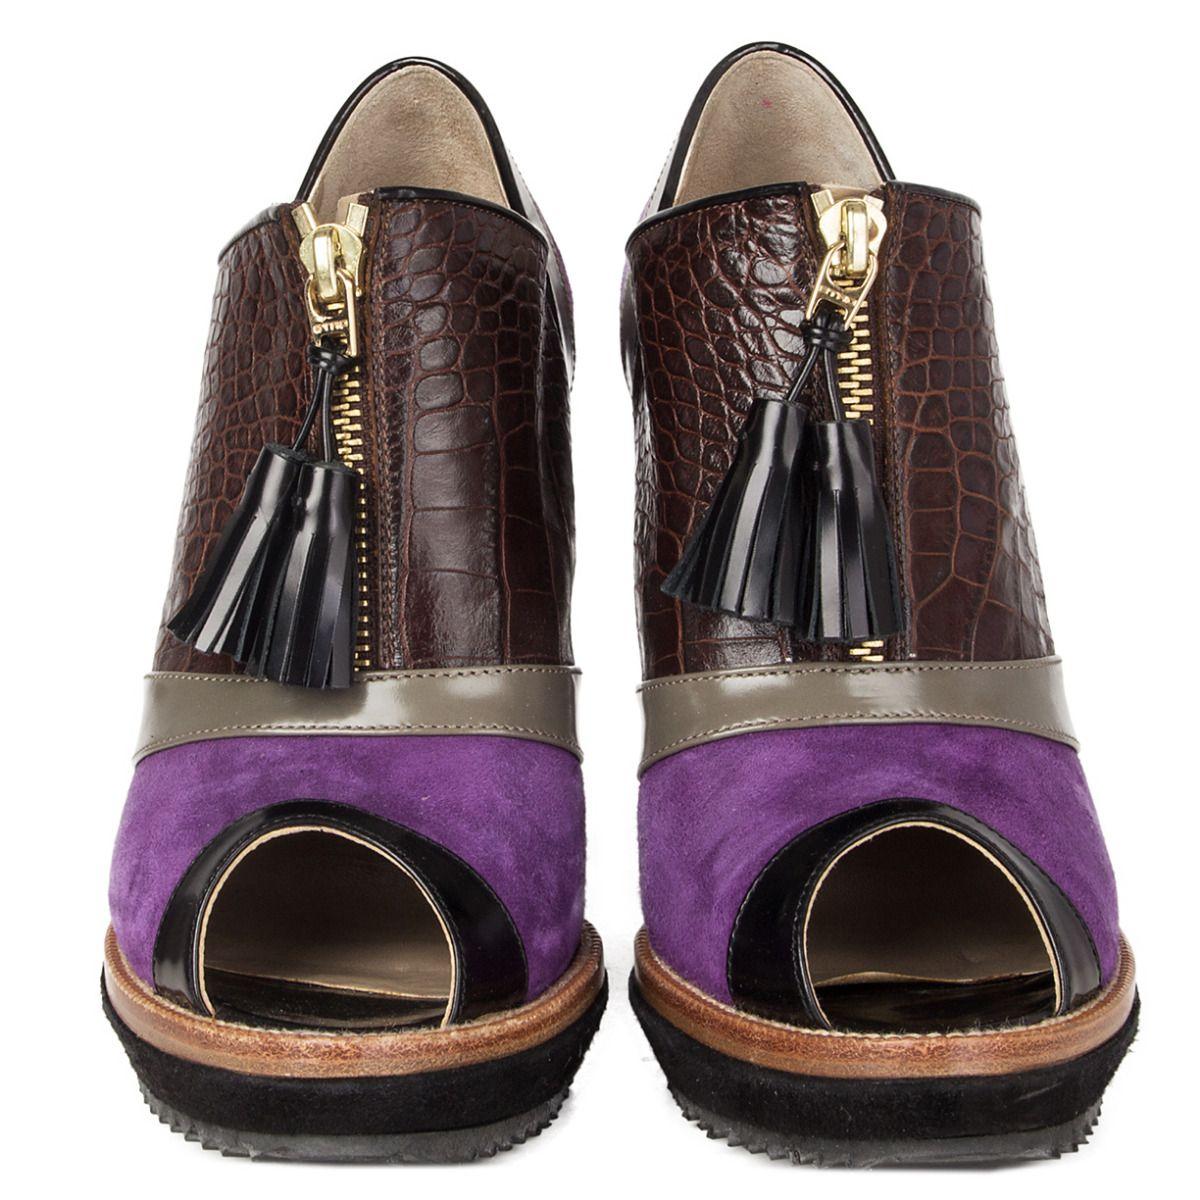 100% authentic Etro booties in purple suede, brown embossed croco leather, sage and black leather featuring black suede heel and platform. Open with zipper tassels. Have been worn once and are in virtually new condition. 

Measurements
Imprinted